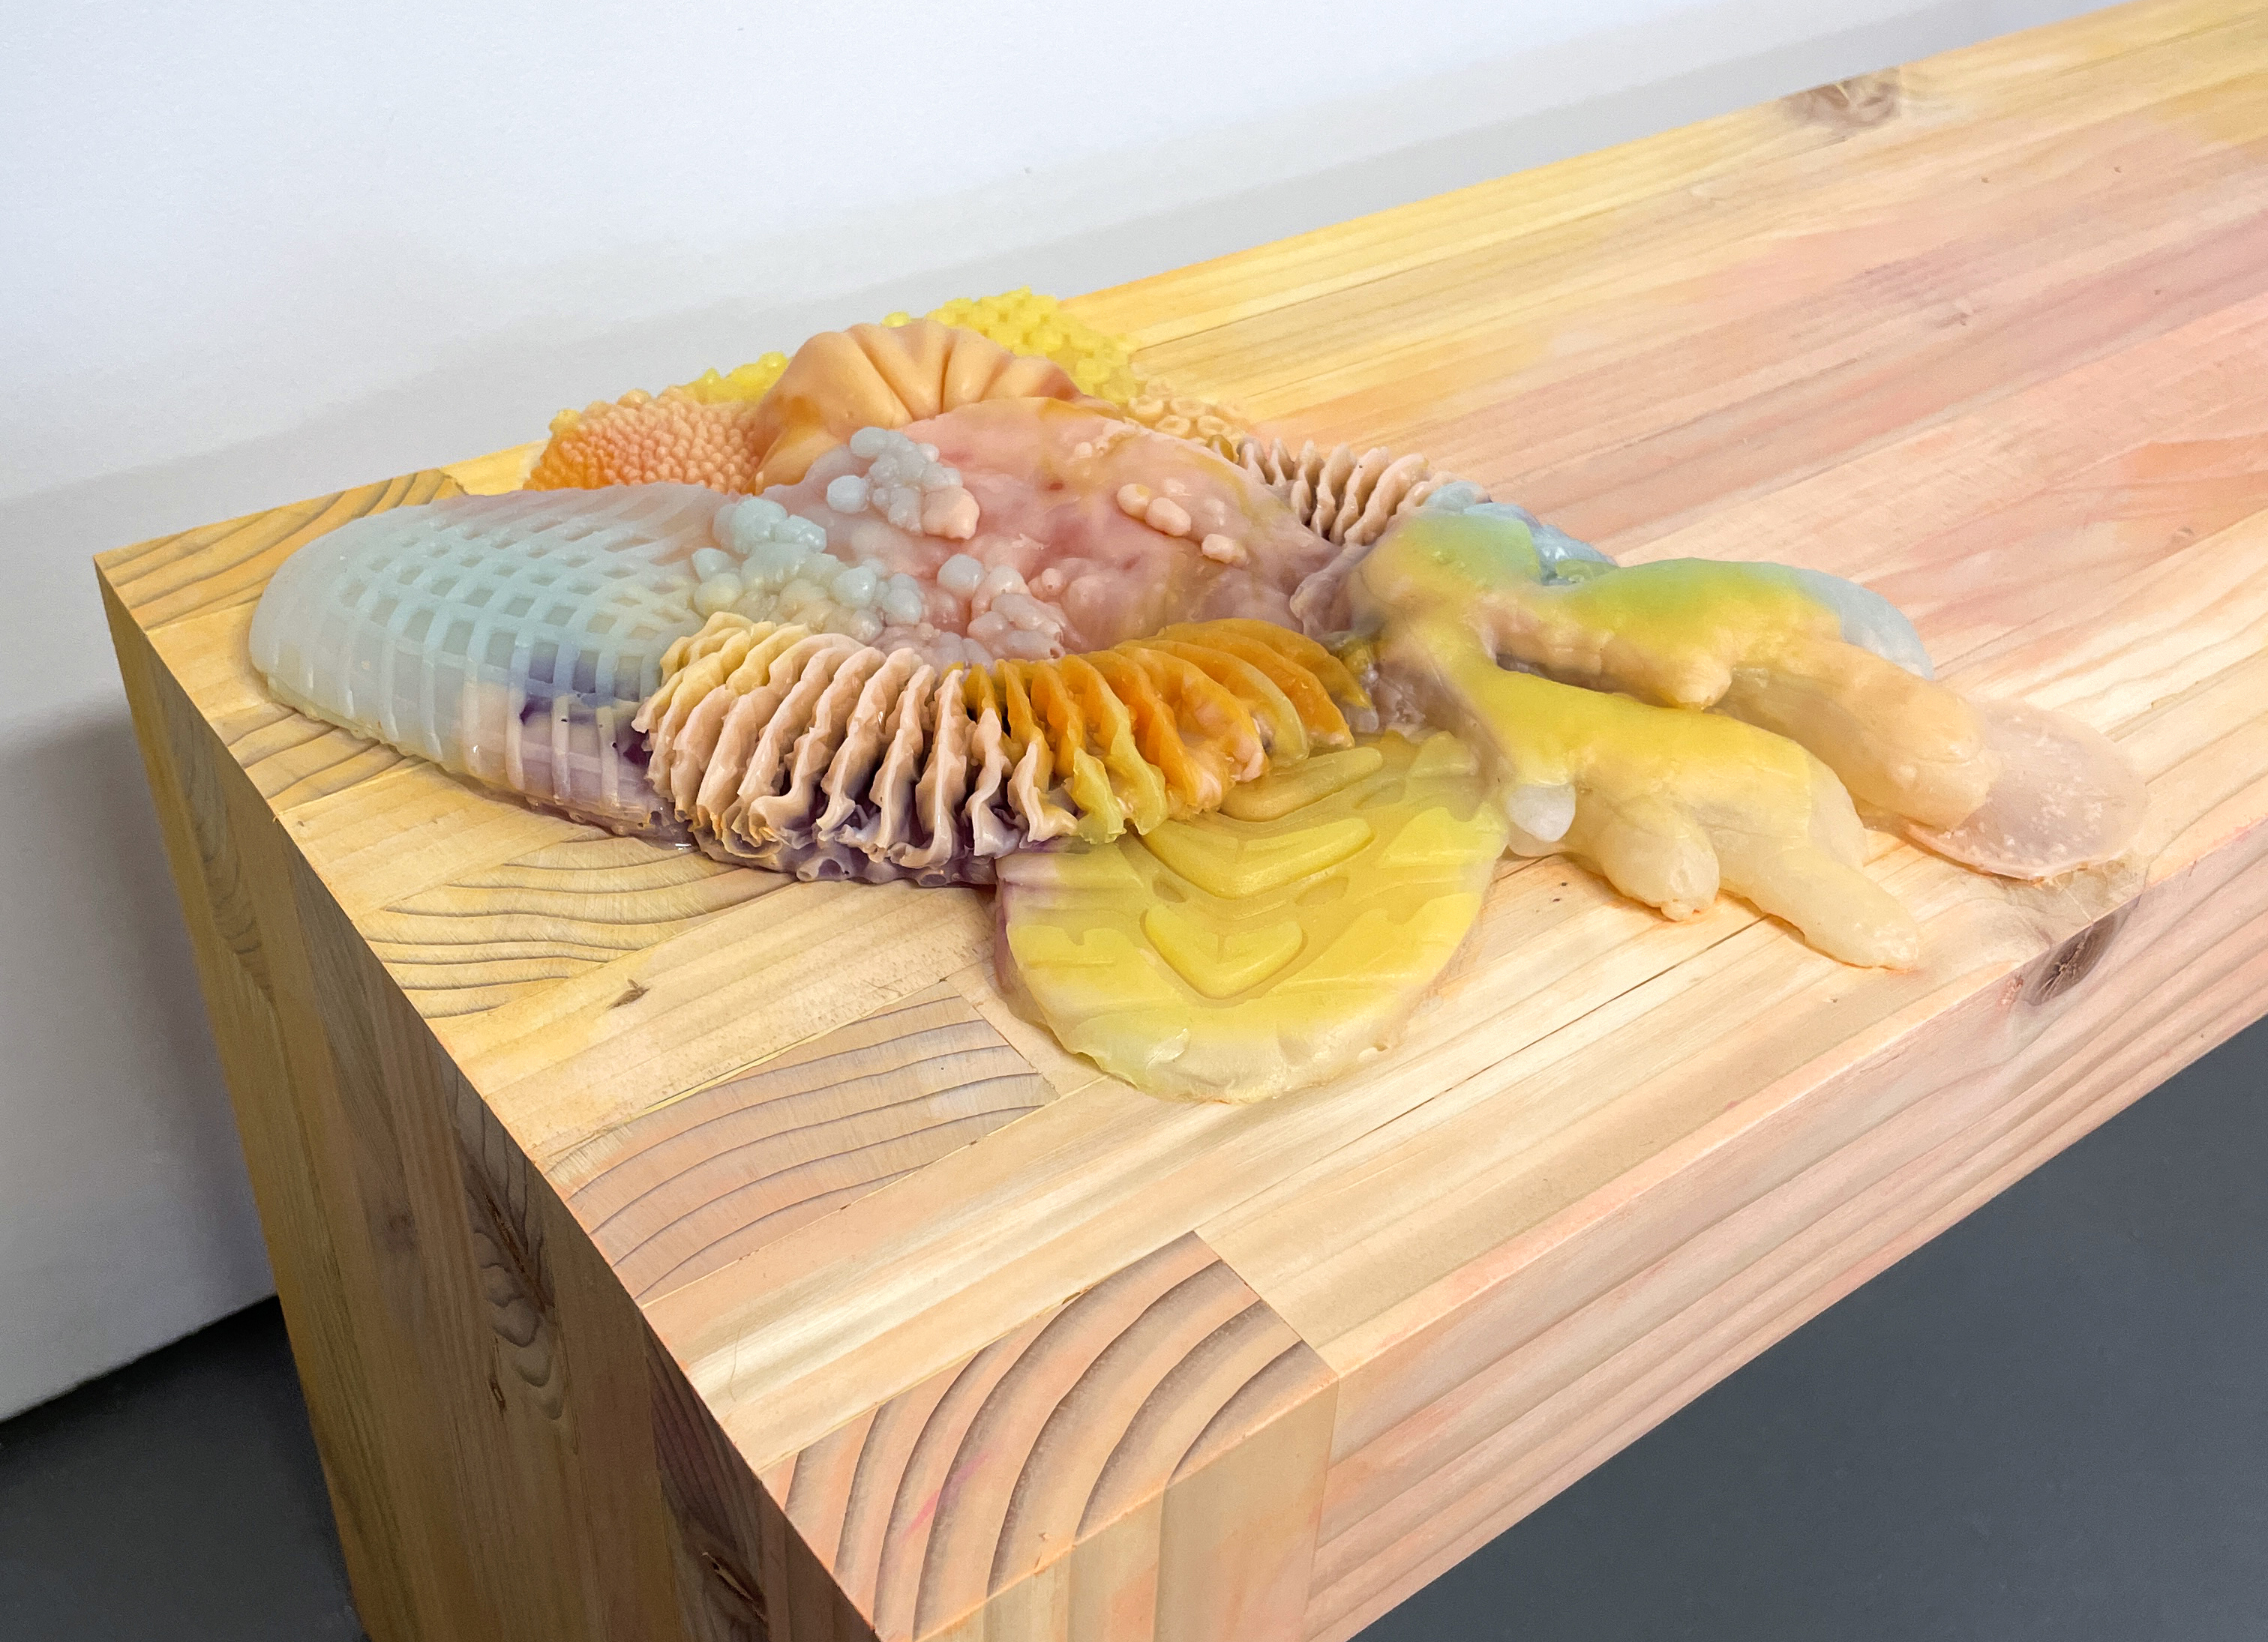 A simply constructed, natural pine bench with gelatinous, multi-colored sculptures laid on either side. The sculptural elements invite touch as they are highly textural.